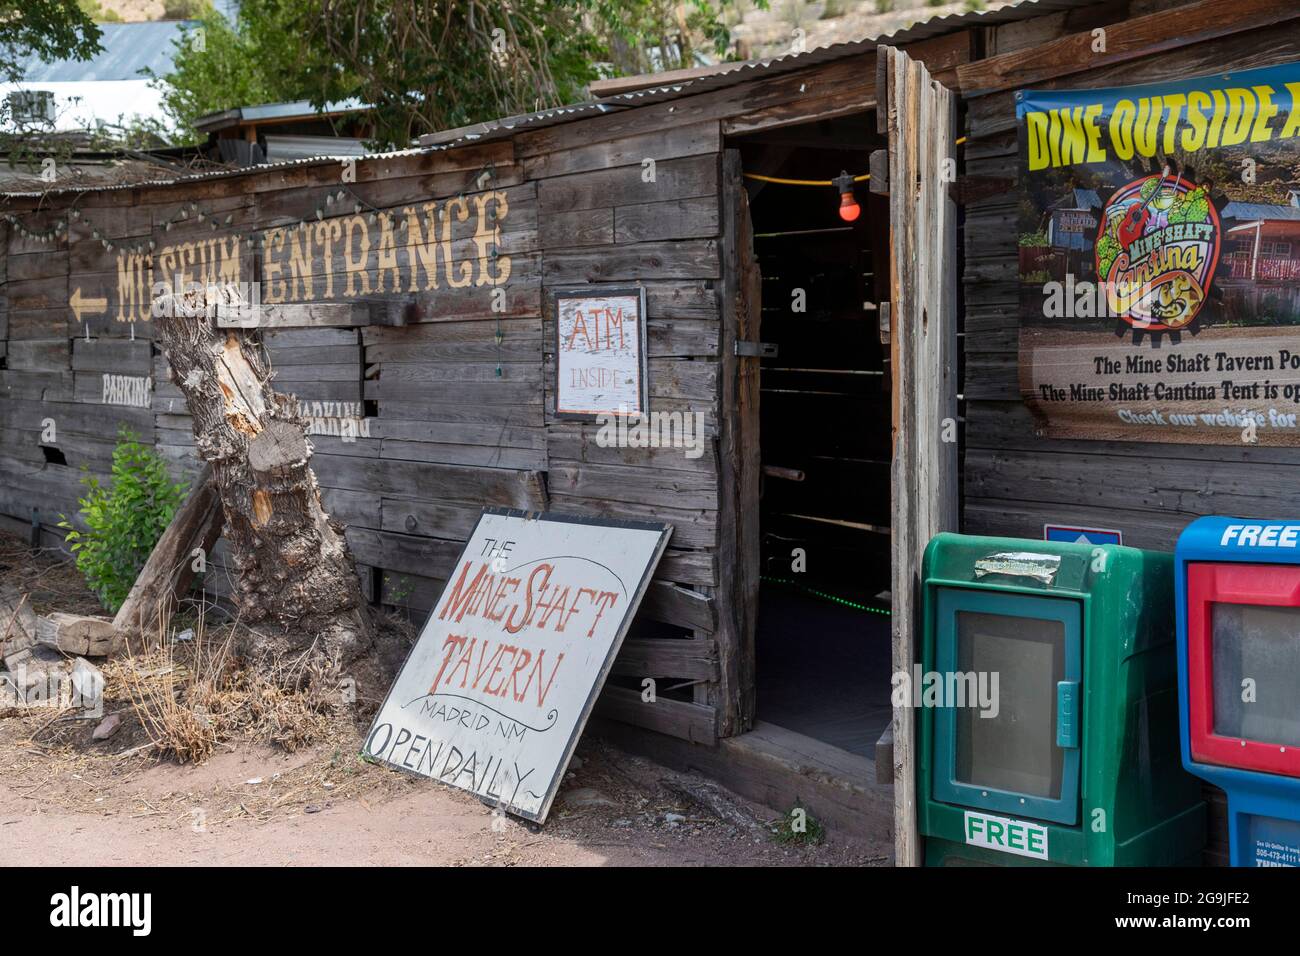 Madrid, New Mexico - The Mine Shaft Tavern in a small town filled with art shops and other tourist attractions on the Turquoise Trail National Scenic Stock Photo